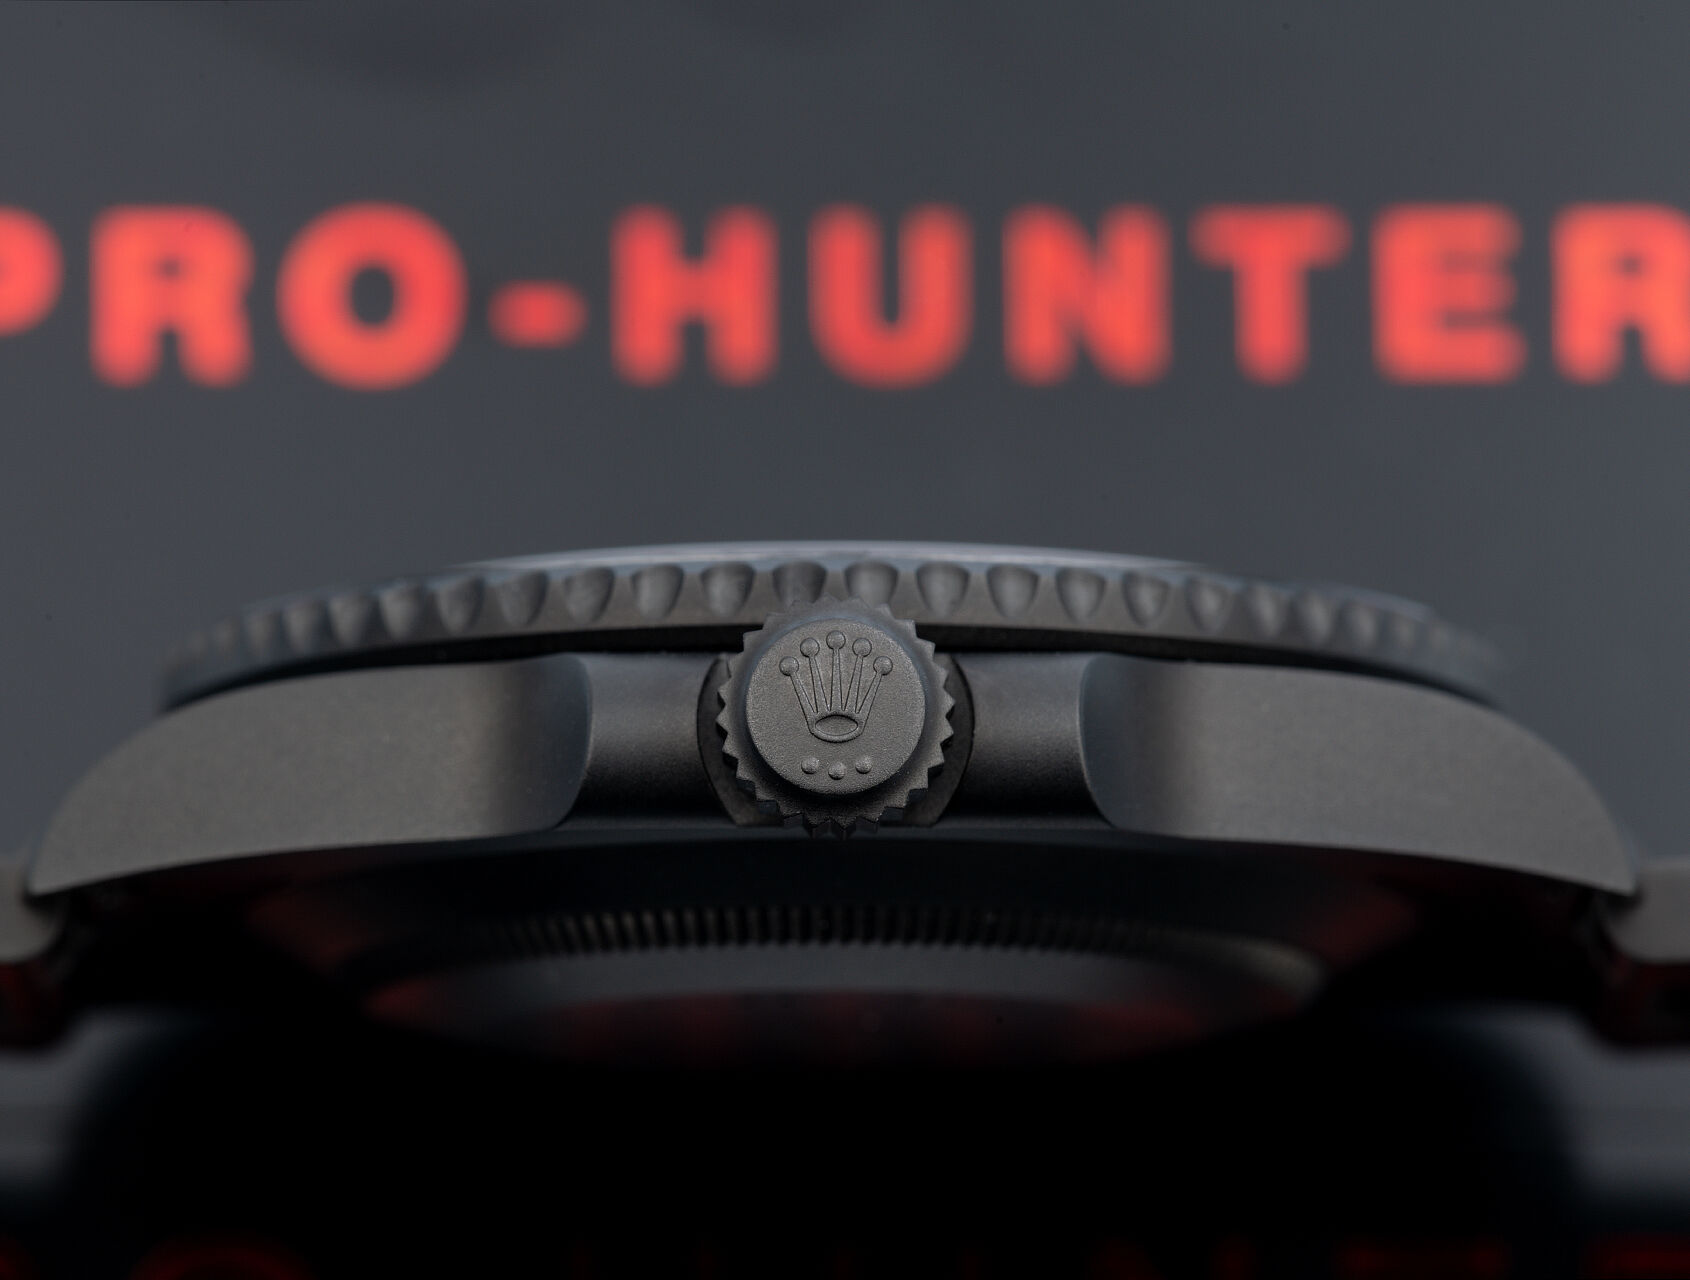 ref 114060 | Limited Edition - 5 Year Warranty | Pro Hunter Submariner Military